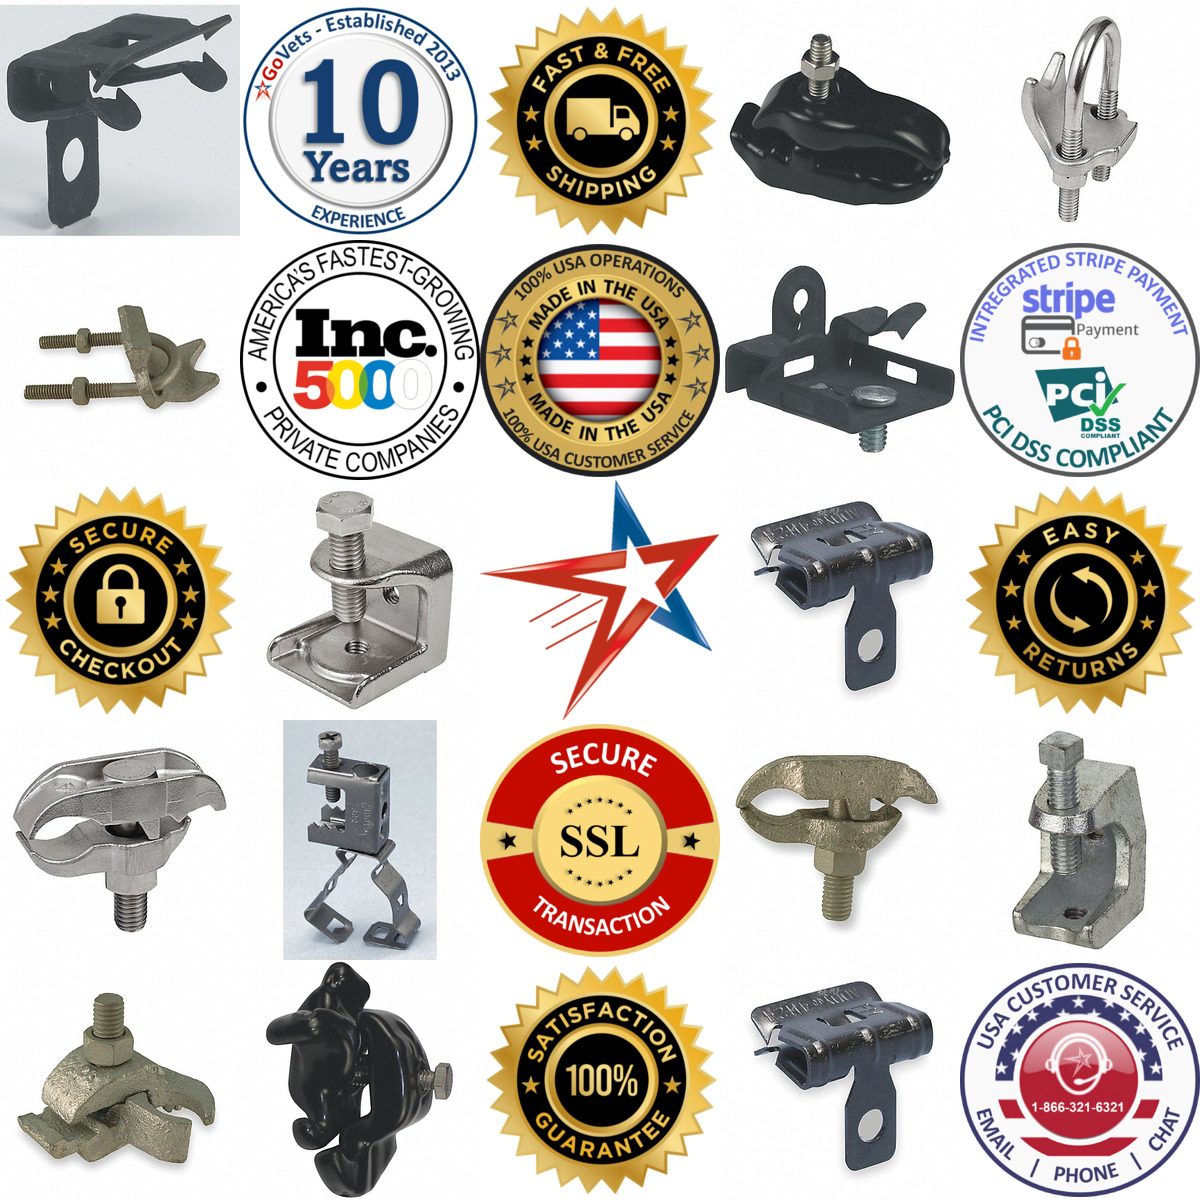 A selection of Beam Clamps products on GoVets